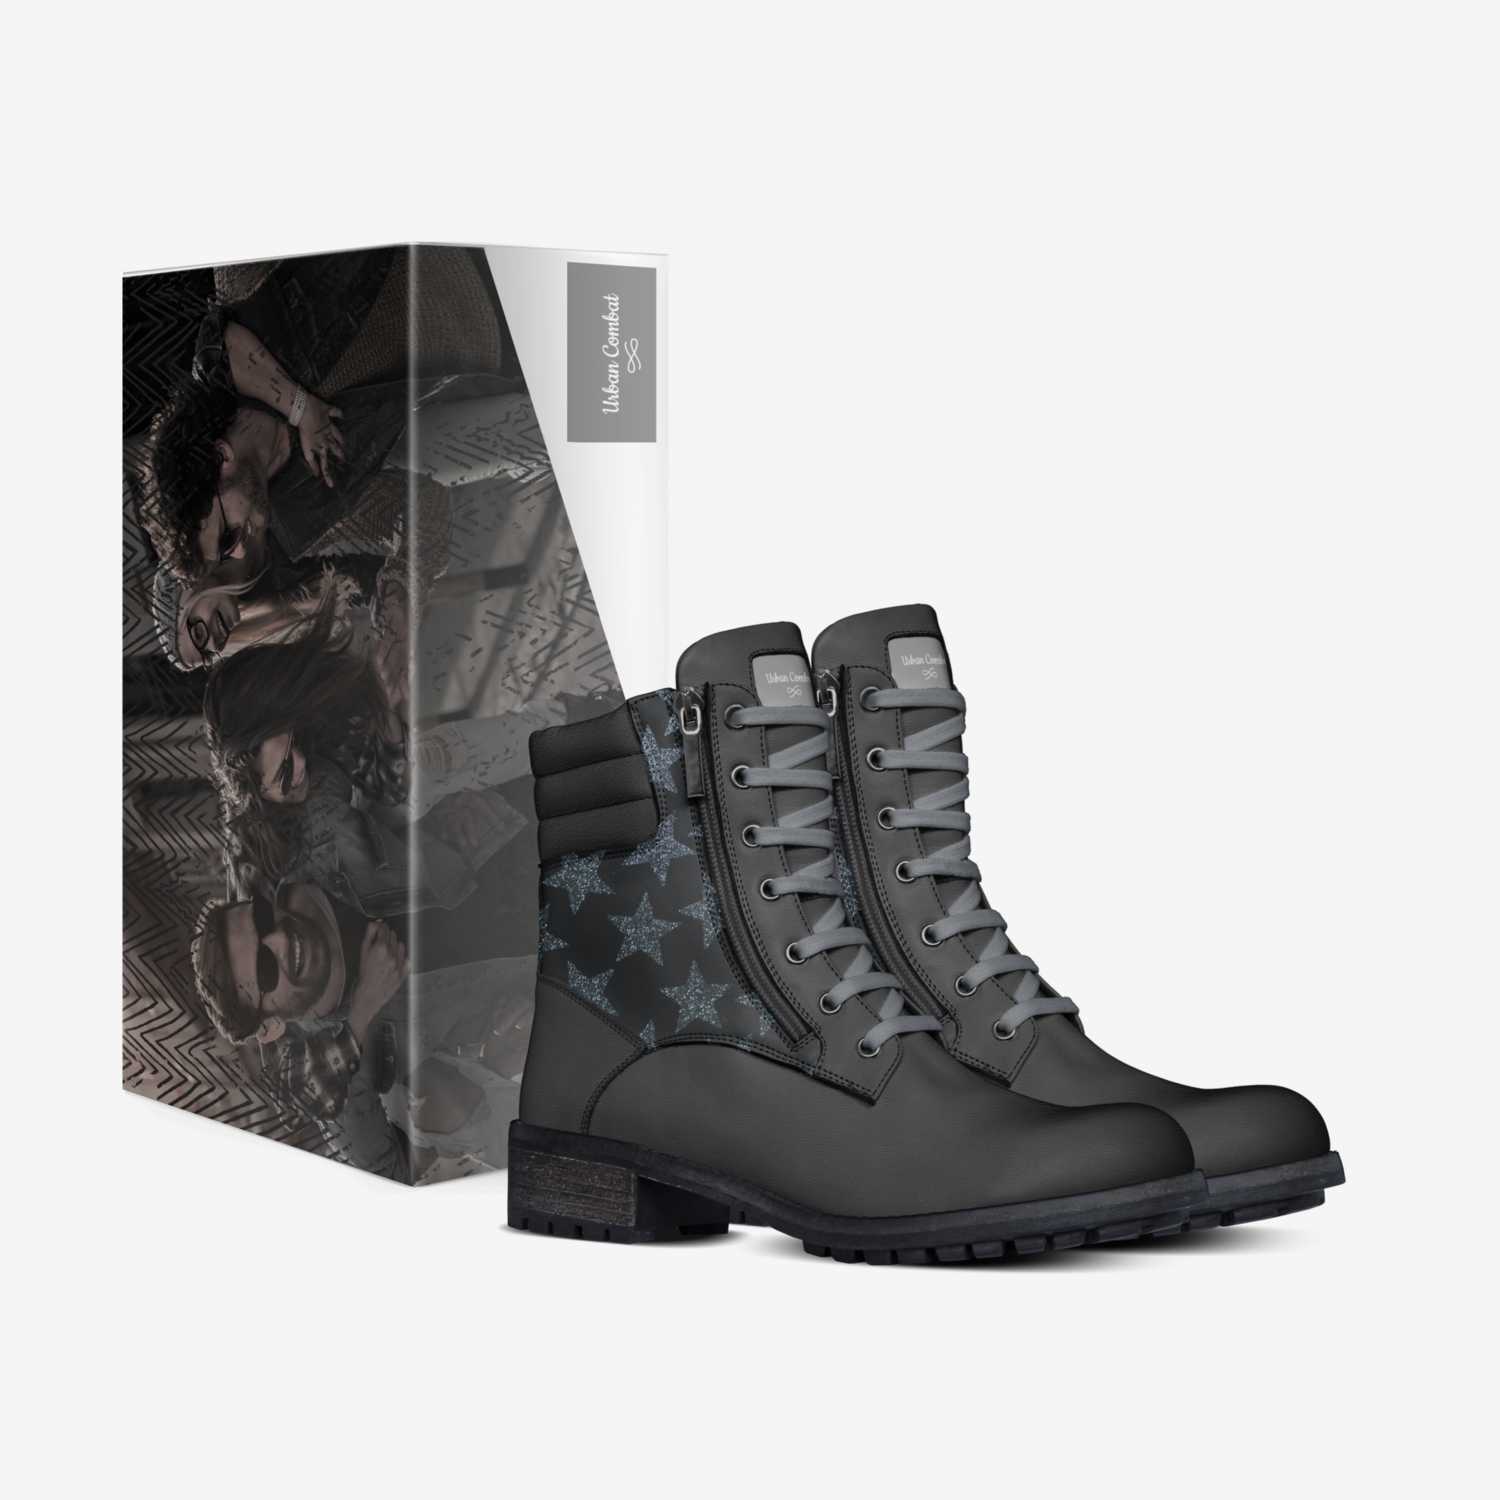 Urban Combat custom made in Italy shoes by Daniel Carlson | Box view